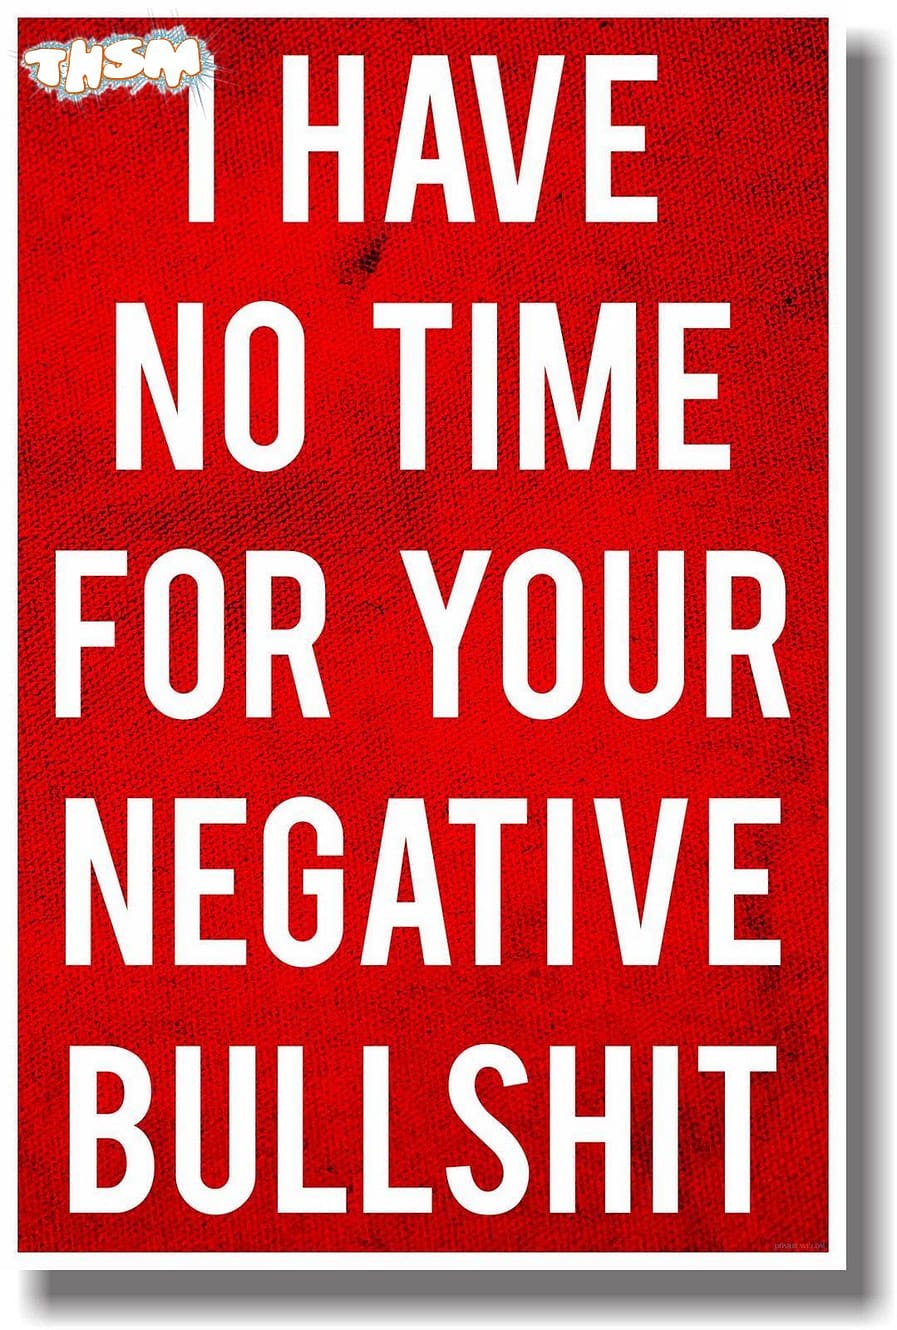 I Have No Time For Your Negative Bullshit Sticker Free Vector cdr Download - 3axis.co